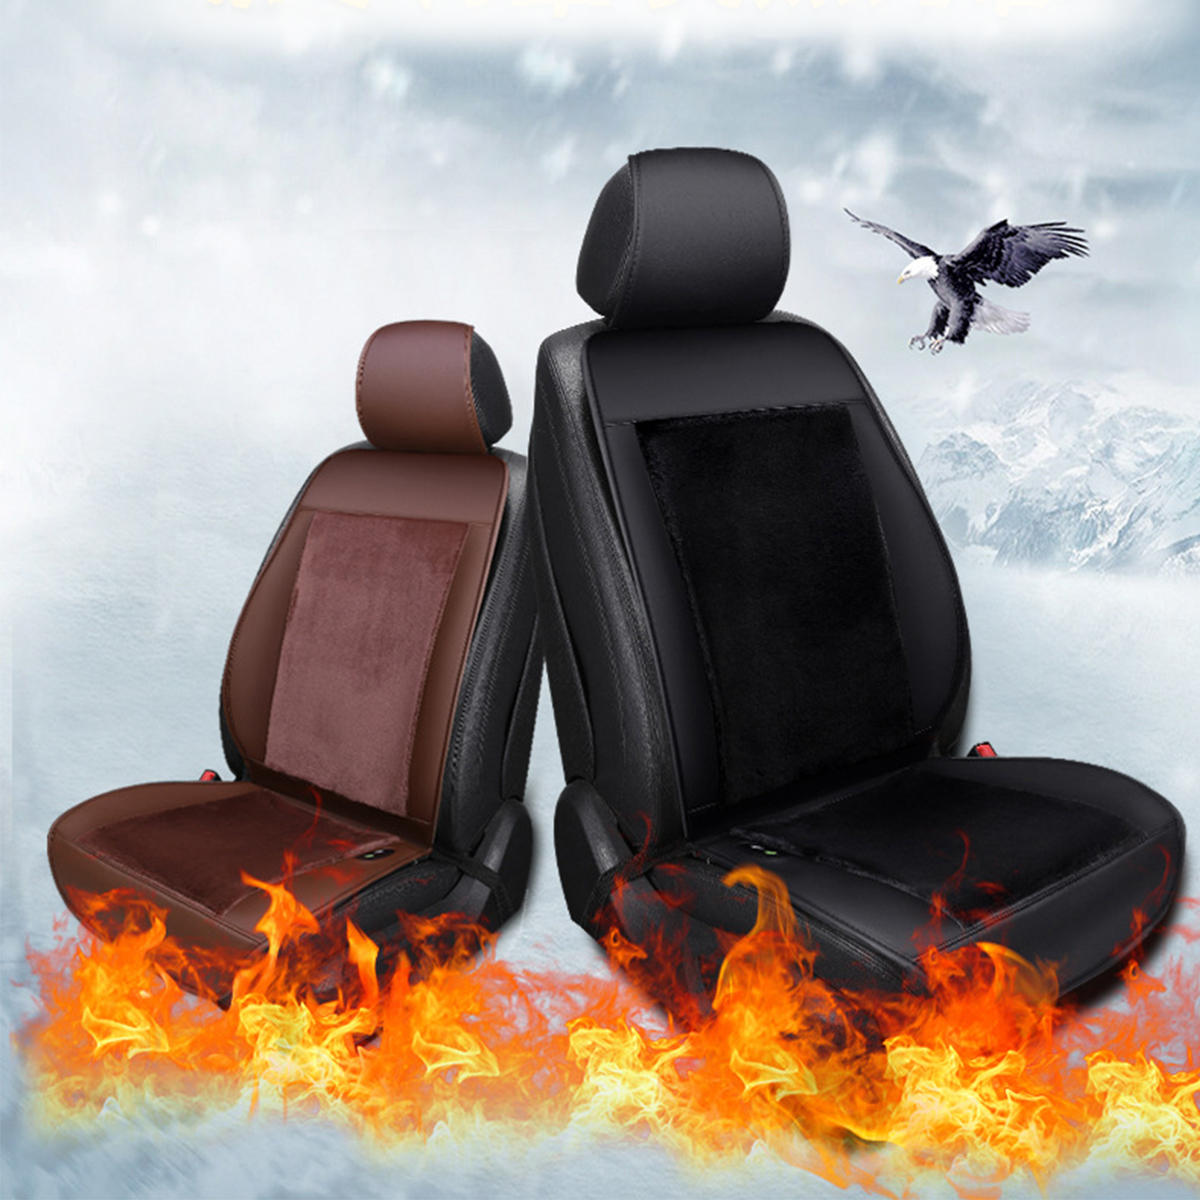 12v 24v Heated Car Seat Cushion Cover Heater Warmer Winter Banggood Usa Sold Out Arrival Notice - What Is The Best Heated Car Seat Cover